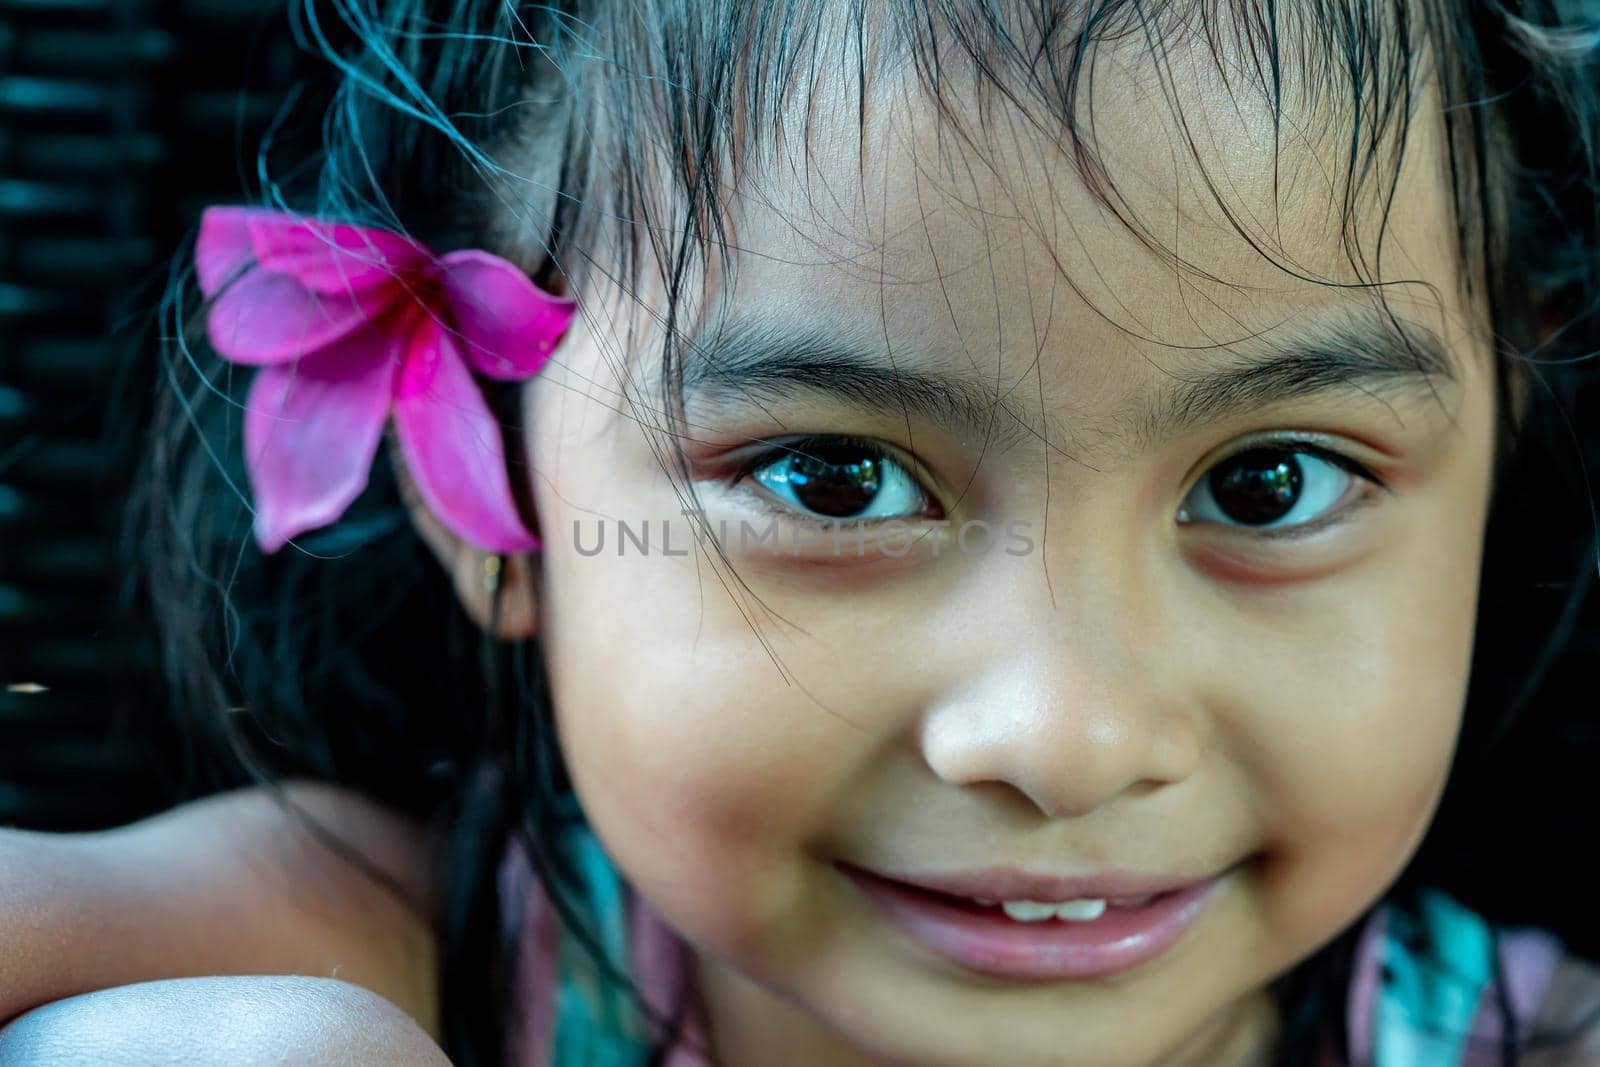 Little girl with large pink flower behind ear. Pretty asian child portrait with flower behind ear smiling by billroque